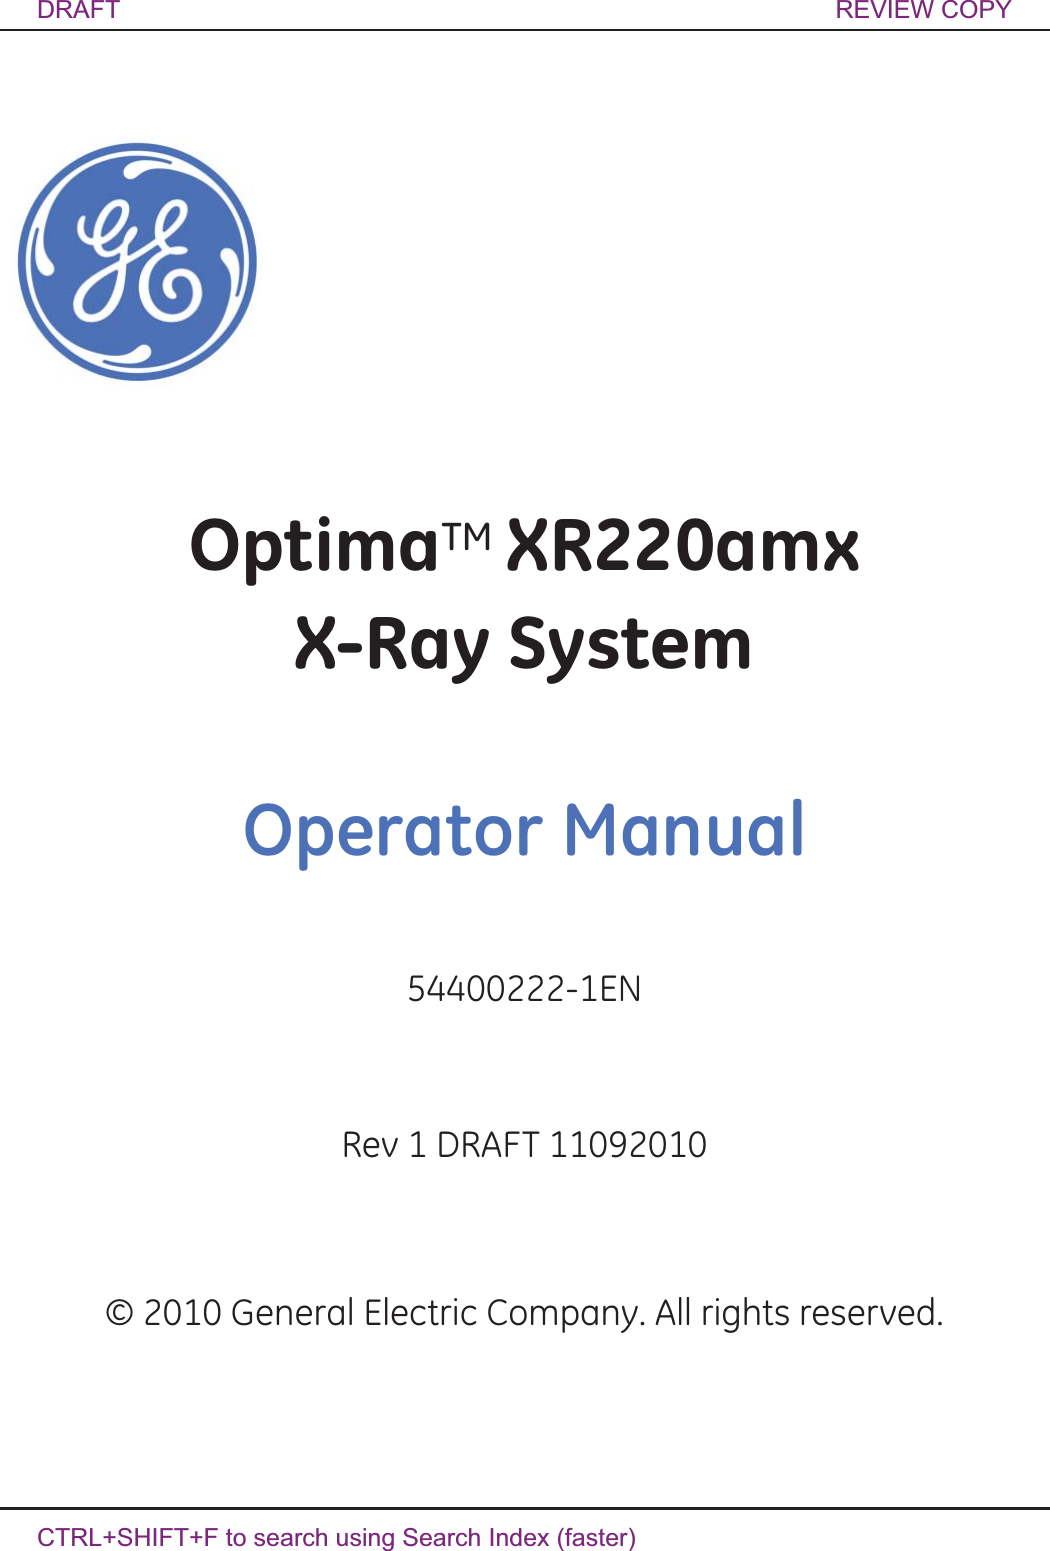  Optima XR220amx X-Ray System 54400222-1EN Rev 1 DRAFT 11092010 1-1Operator Manual © 2010 General Electric Company. All rights reserved.Rev 1 DRAFT 10142010 OptimaTM XR220amxX-Ray SystemOperator Manual54400222-1ENRev 1 DRAFT 11092010© 2010 General Electric Company. All rights reserved.DRAFT REVIEW COPYCTRL+SHIFT+F to search using Search Index (faster)